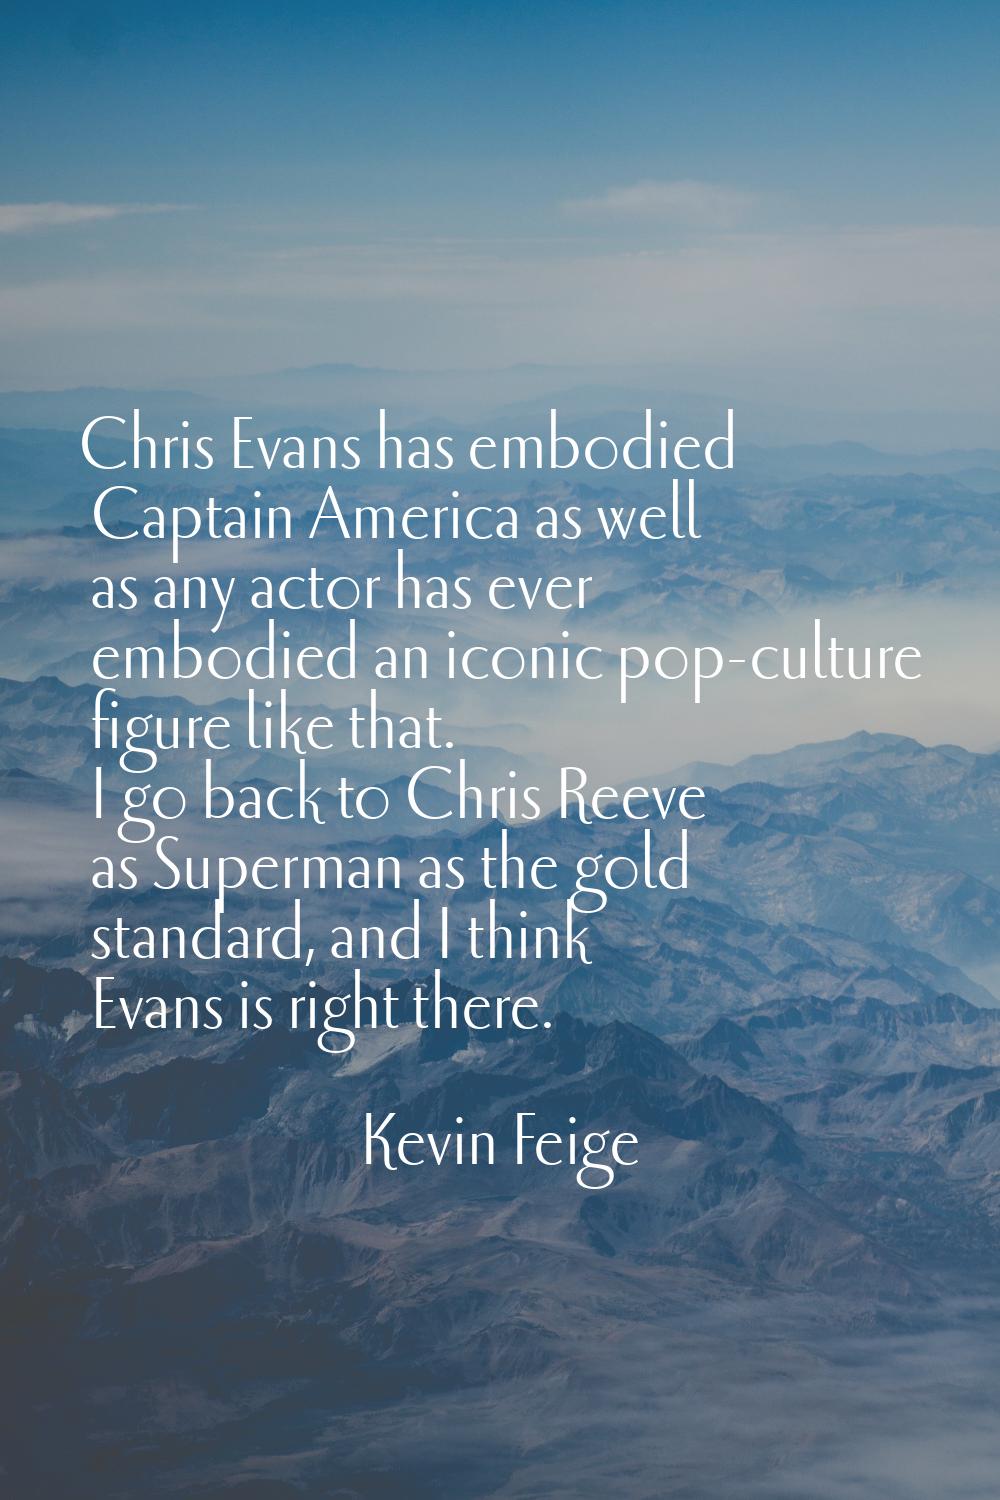 Chris Evans has embodied Captain America as well as any actor has ever embodied an iconic pop-cultu